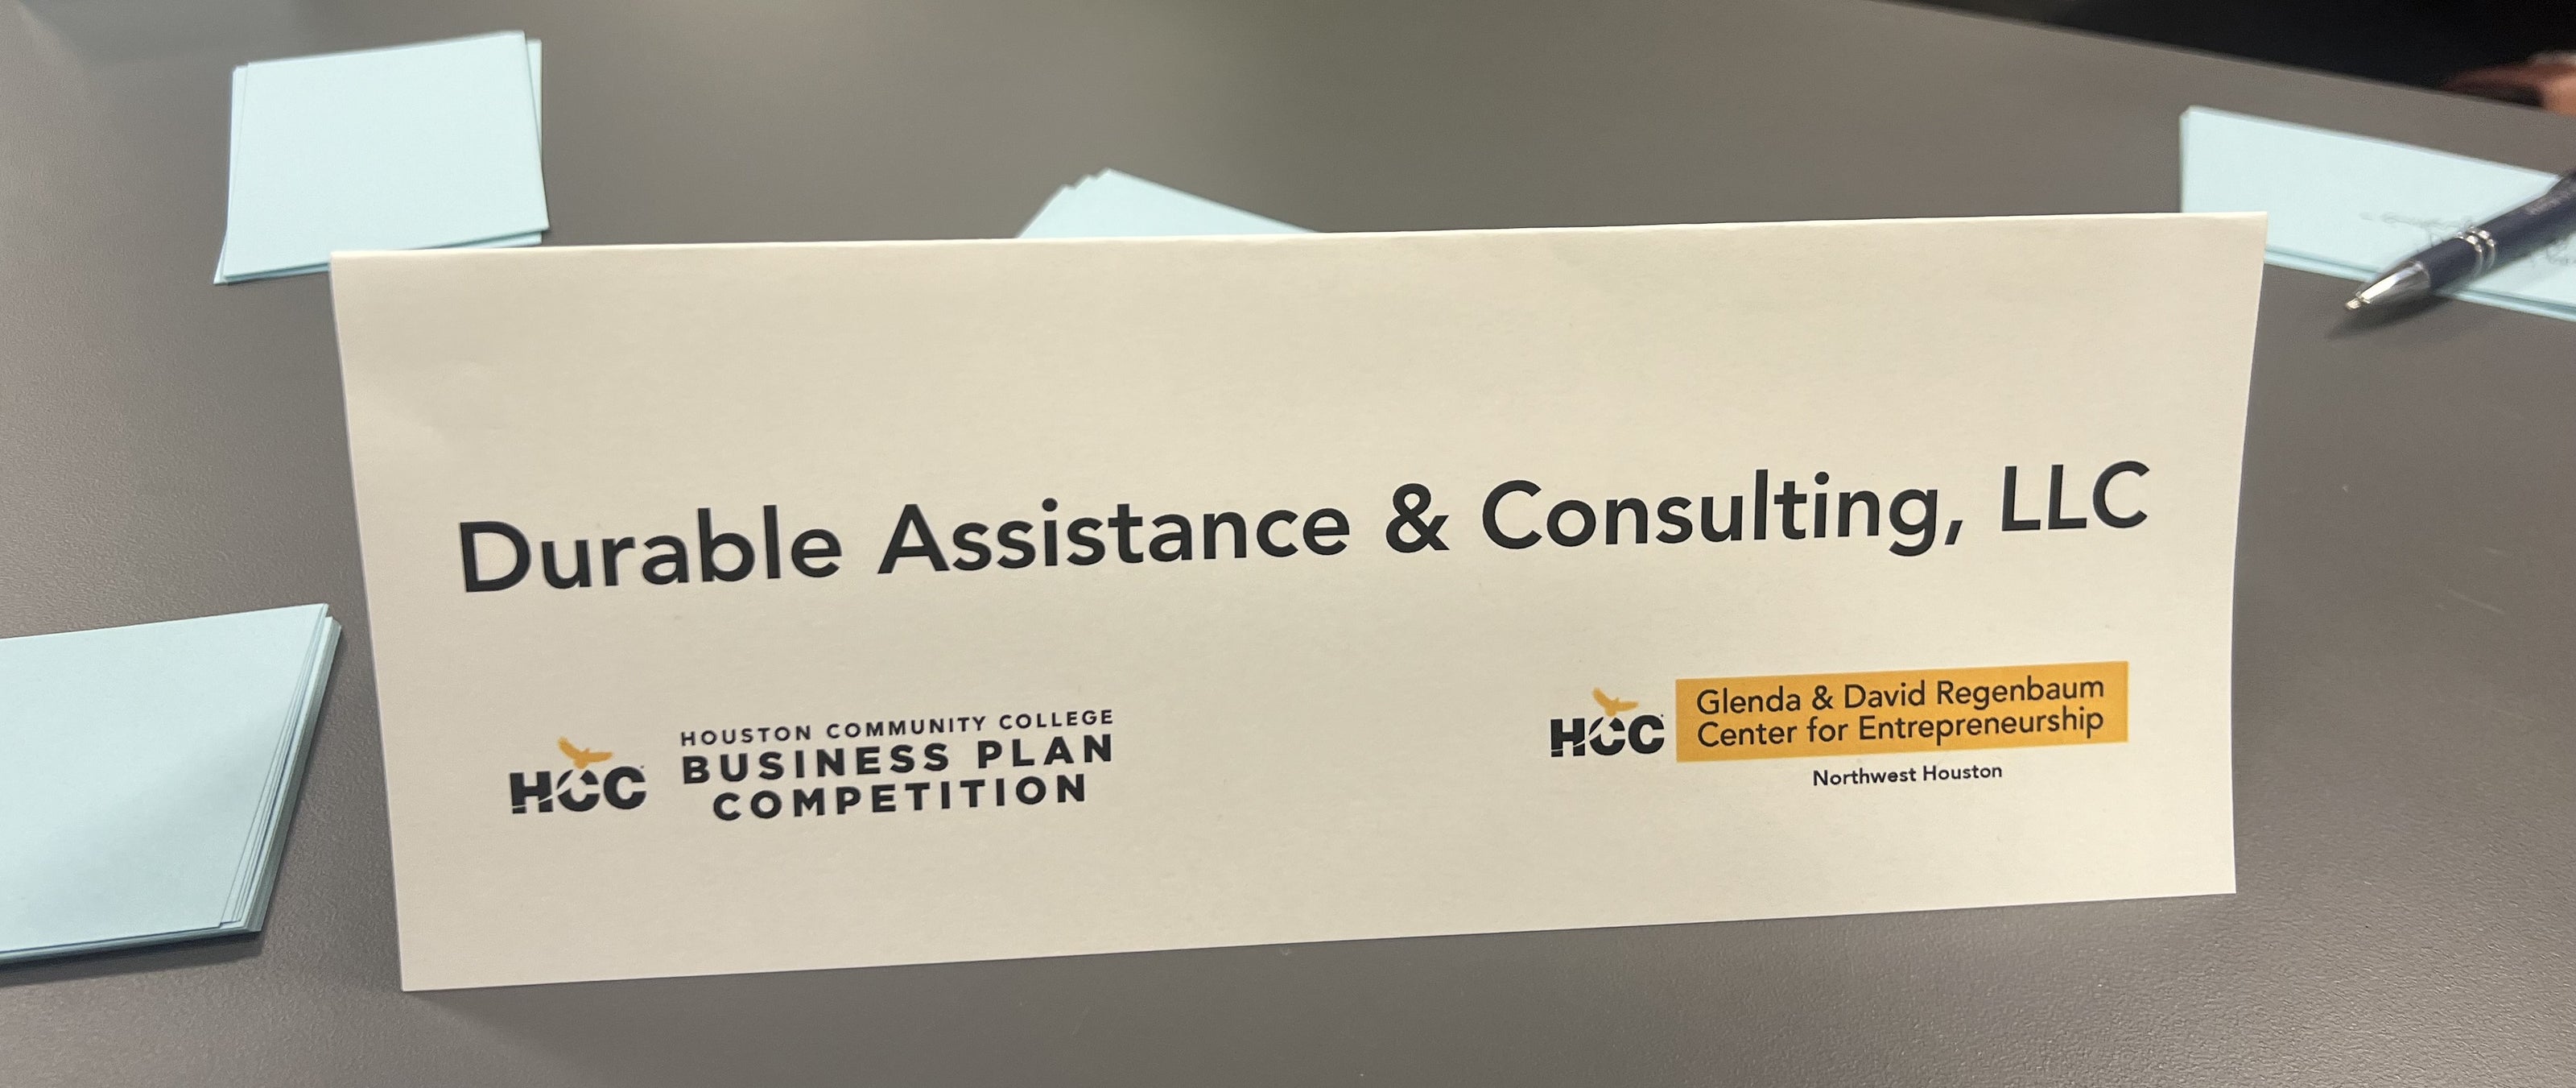 HCC Business Plan Competition Sign with Durable Assistance & Consulting LLC